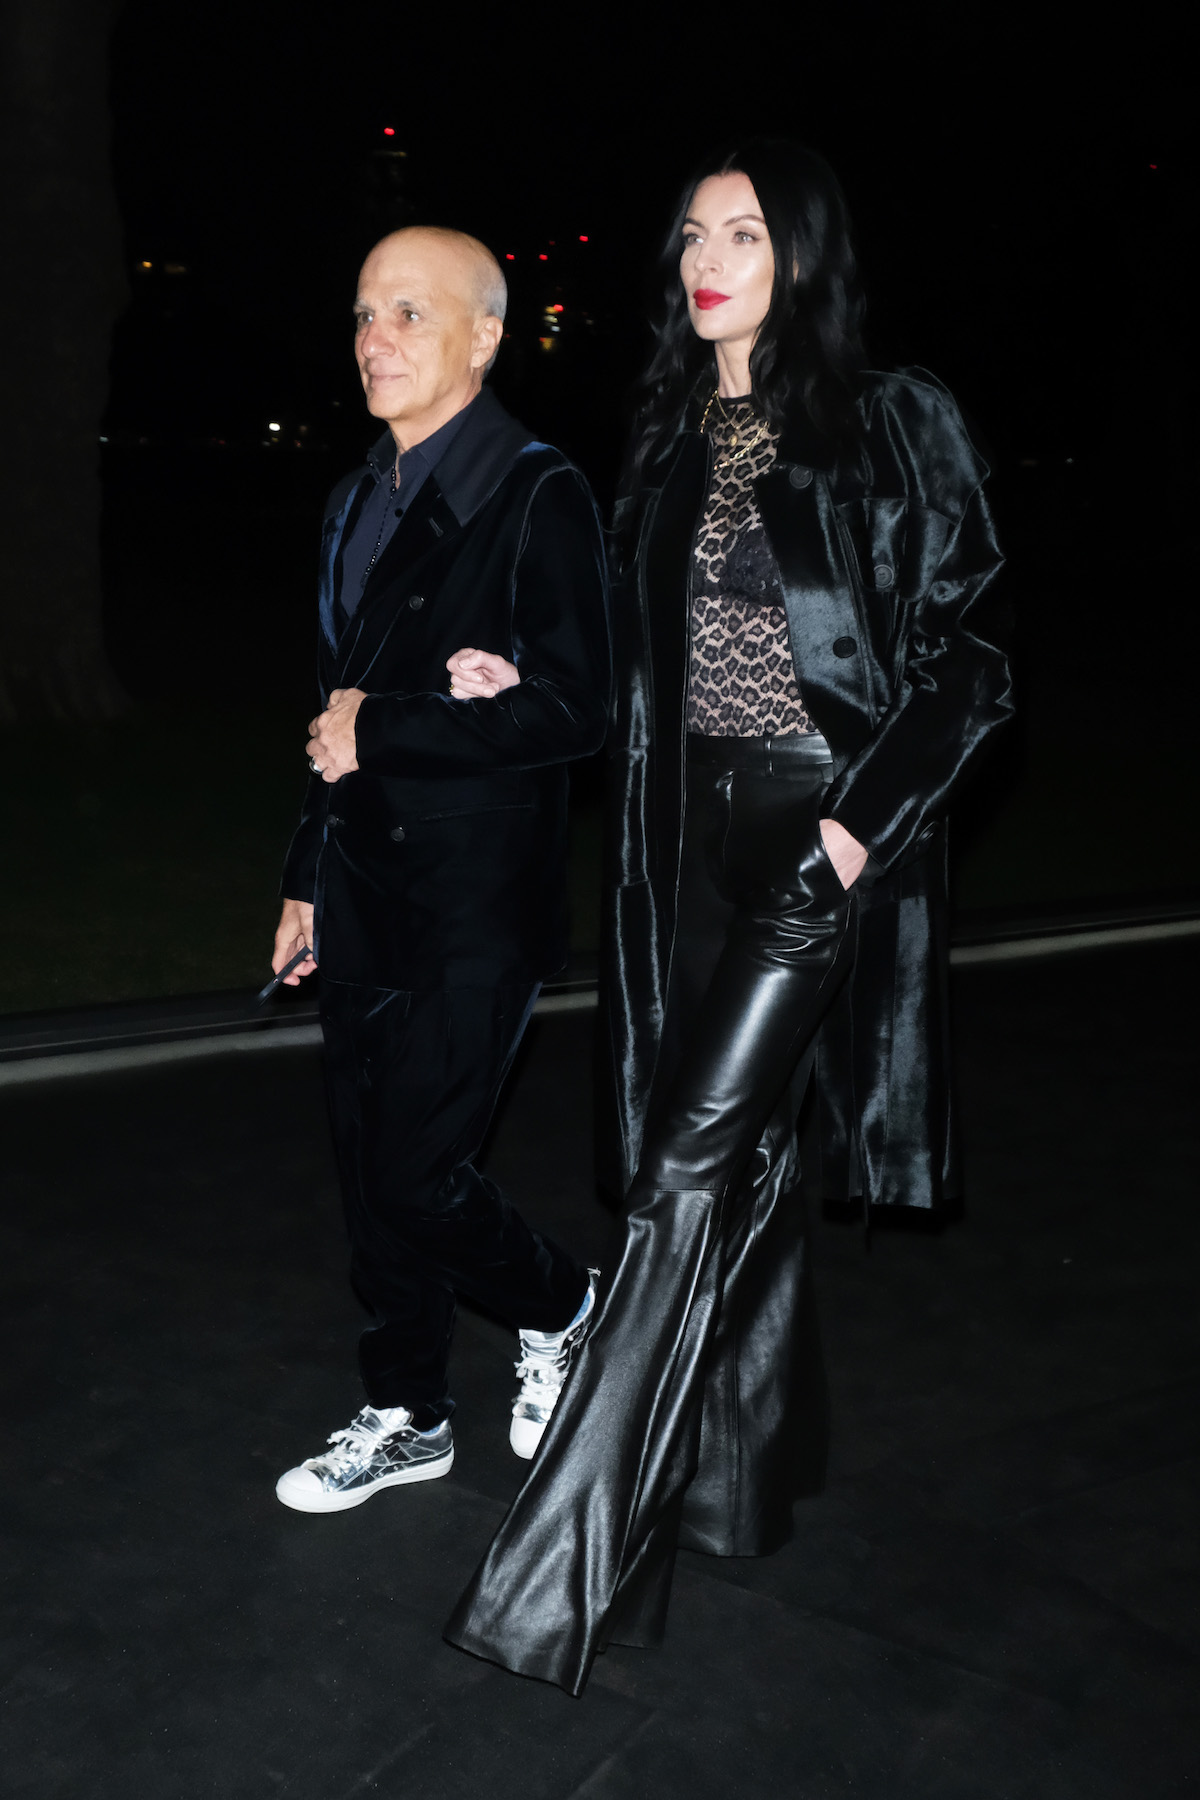 Jimmy Iovine and Liberty Ross